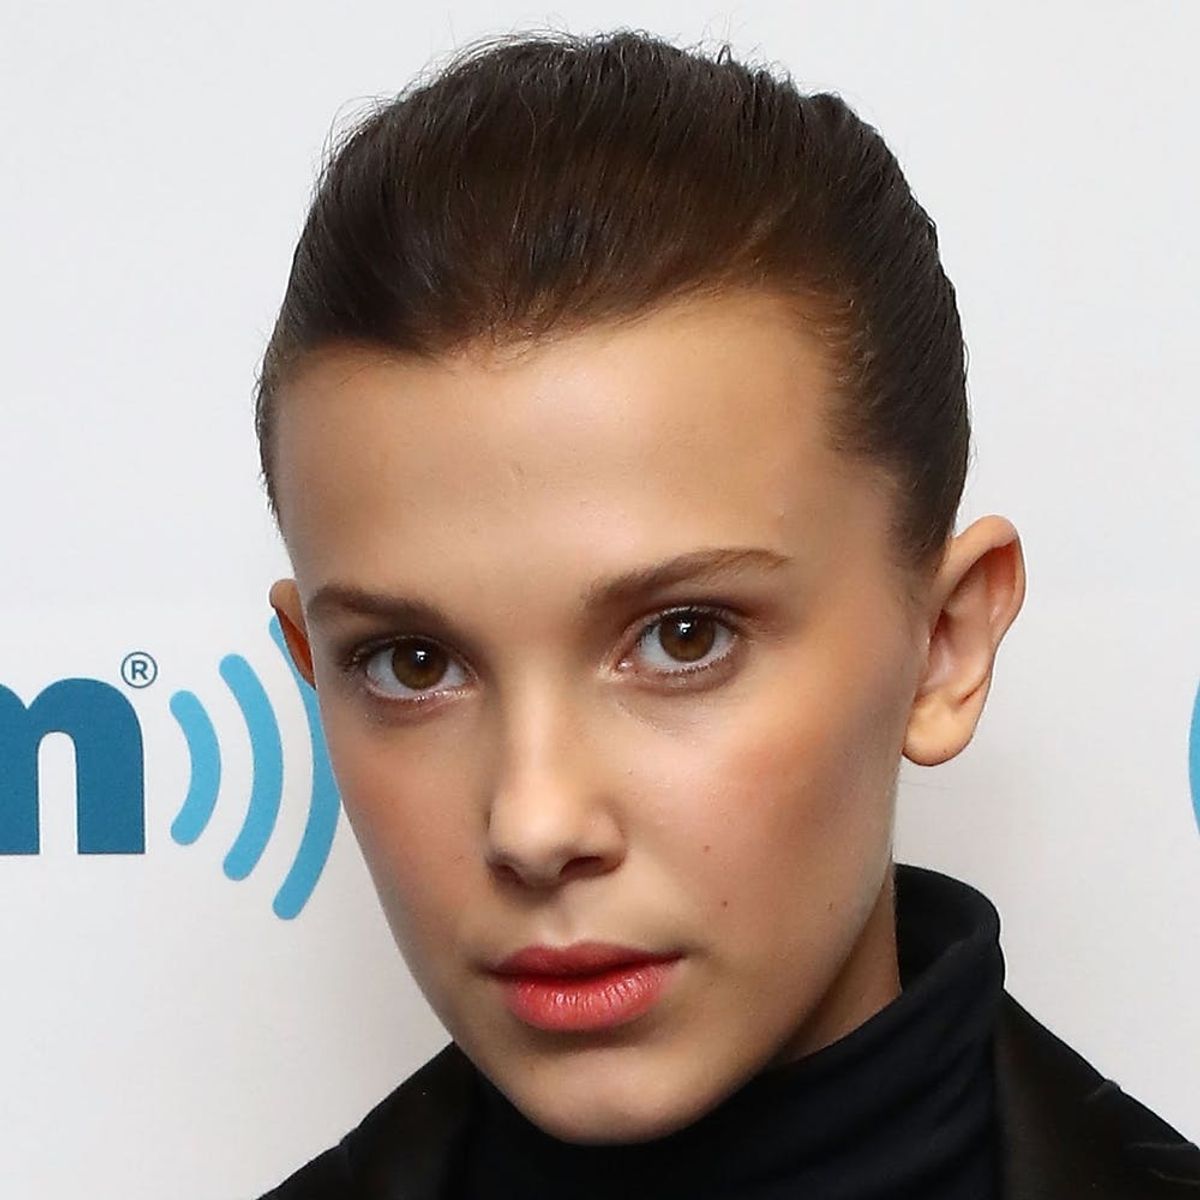 Millie Bobby Brown Reveals the One “Stranger Things” Character She’d Save IRL